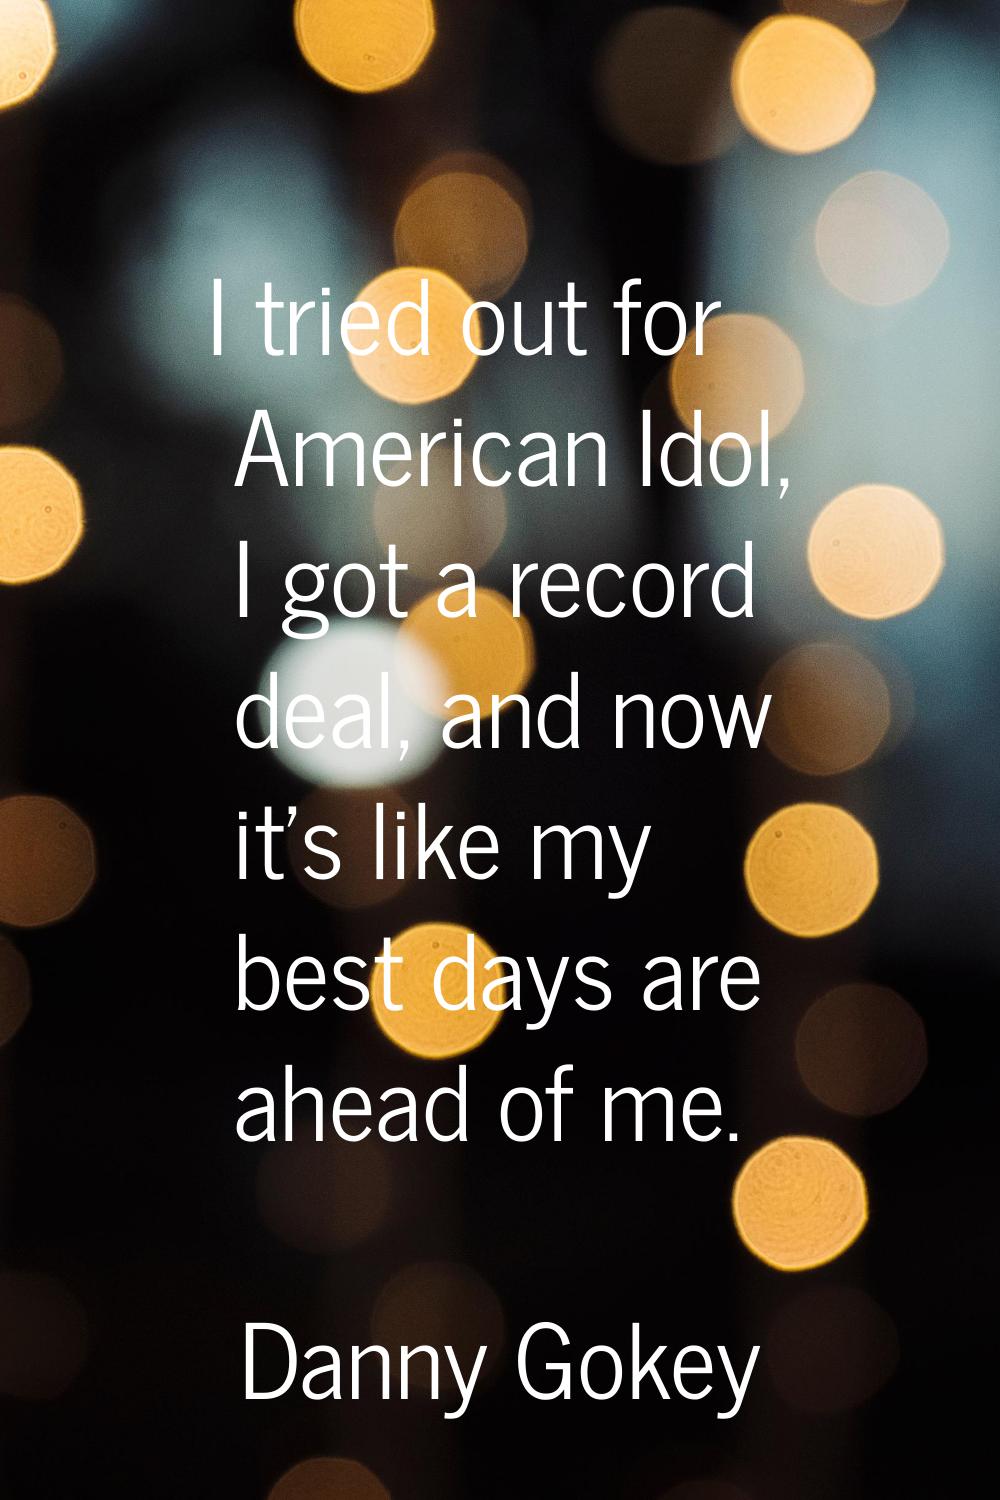 I tried out for American Idol, I got a record deal, and now it's like my best days are ahead of me.